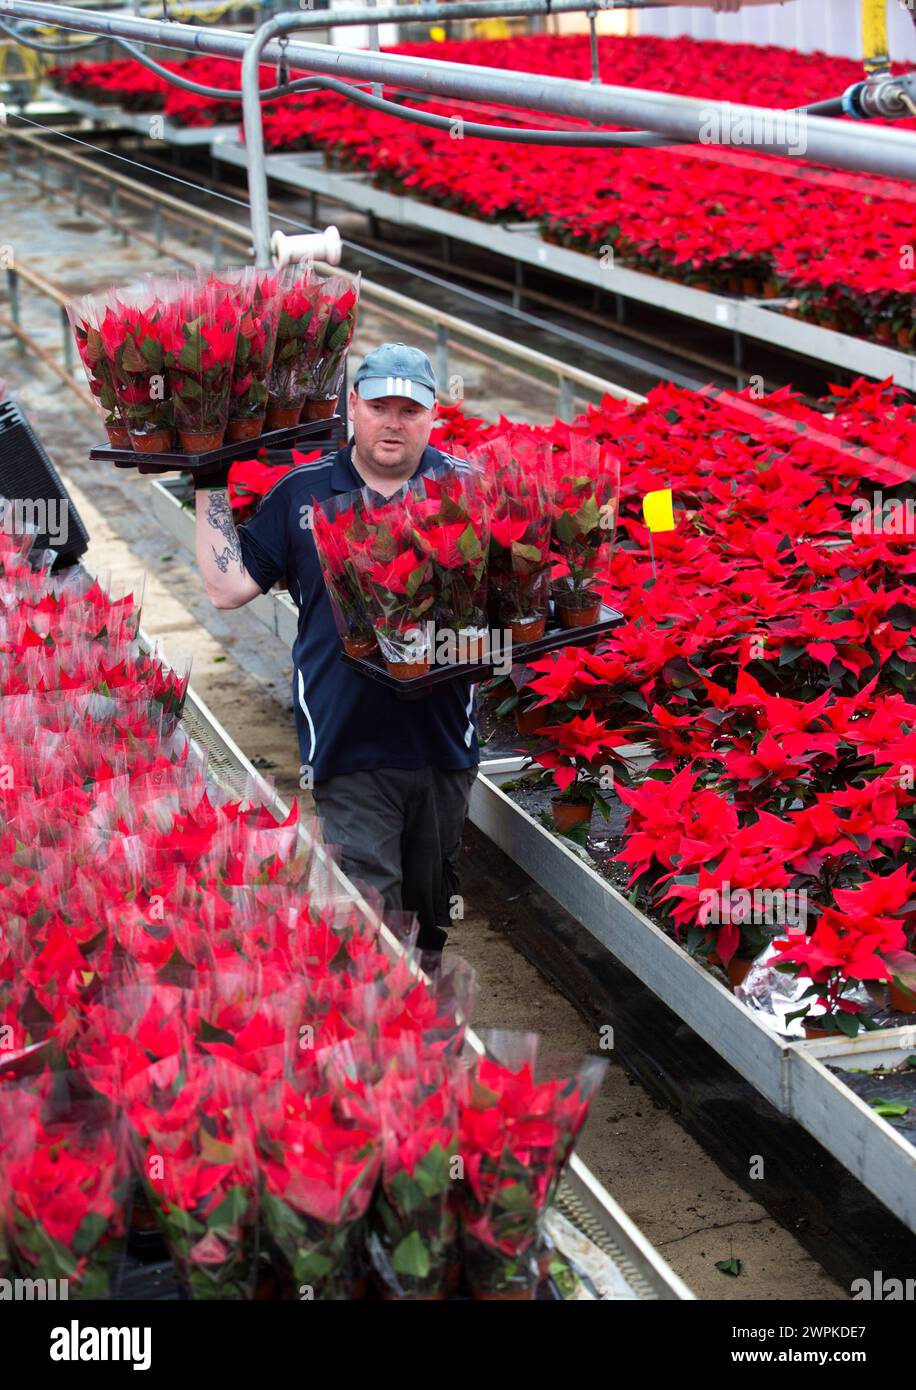 27/11/14  Nursery workers begin to grade and pack 450,000 poinsettias, Bordon Hill Nurseries, near Stratford-upon-Avon. The festive plants are grown u Stock Photo